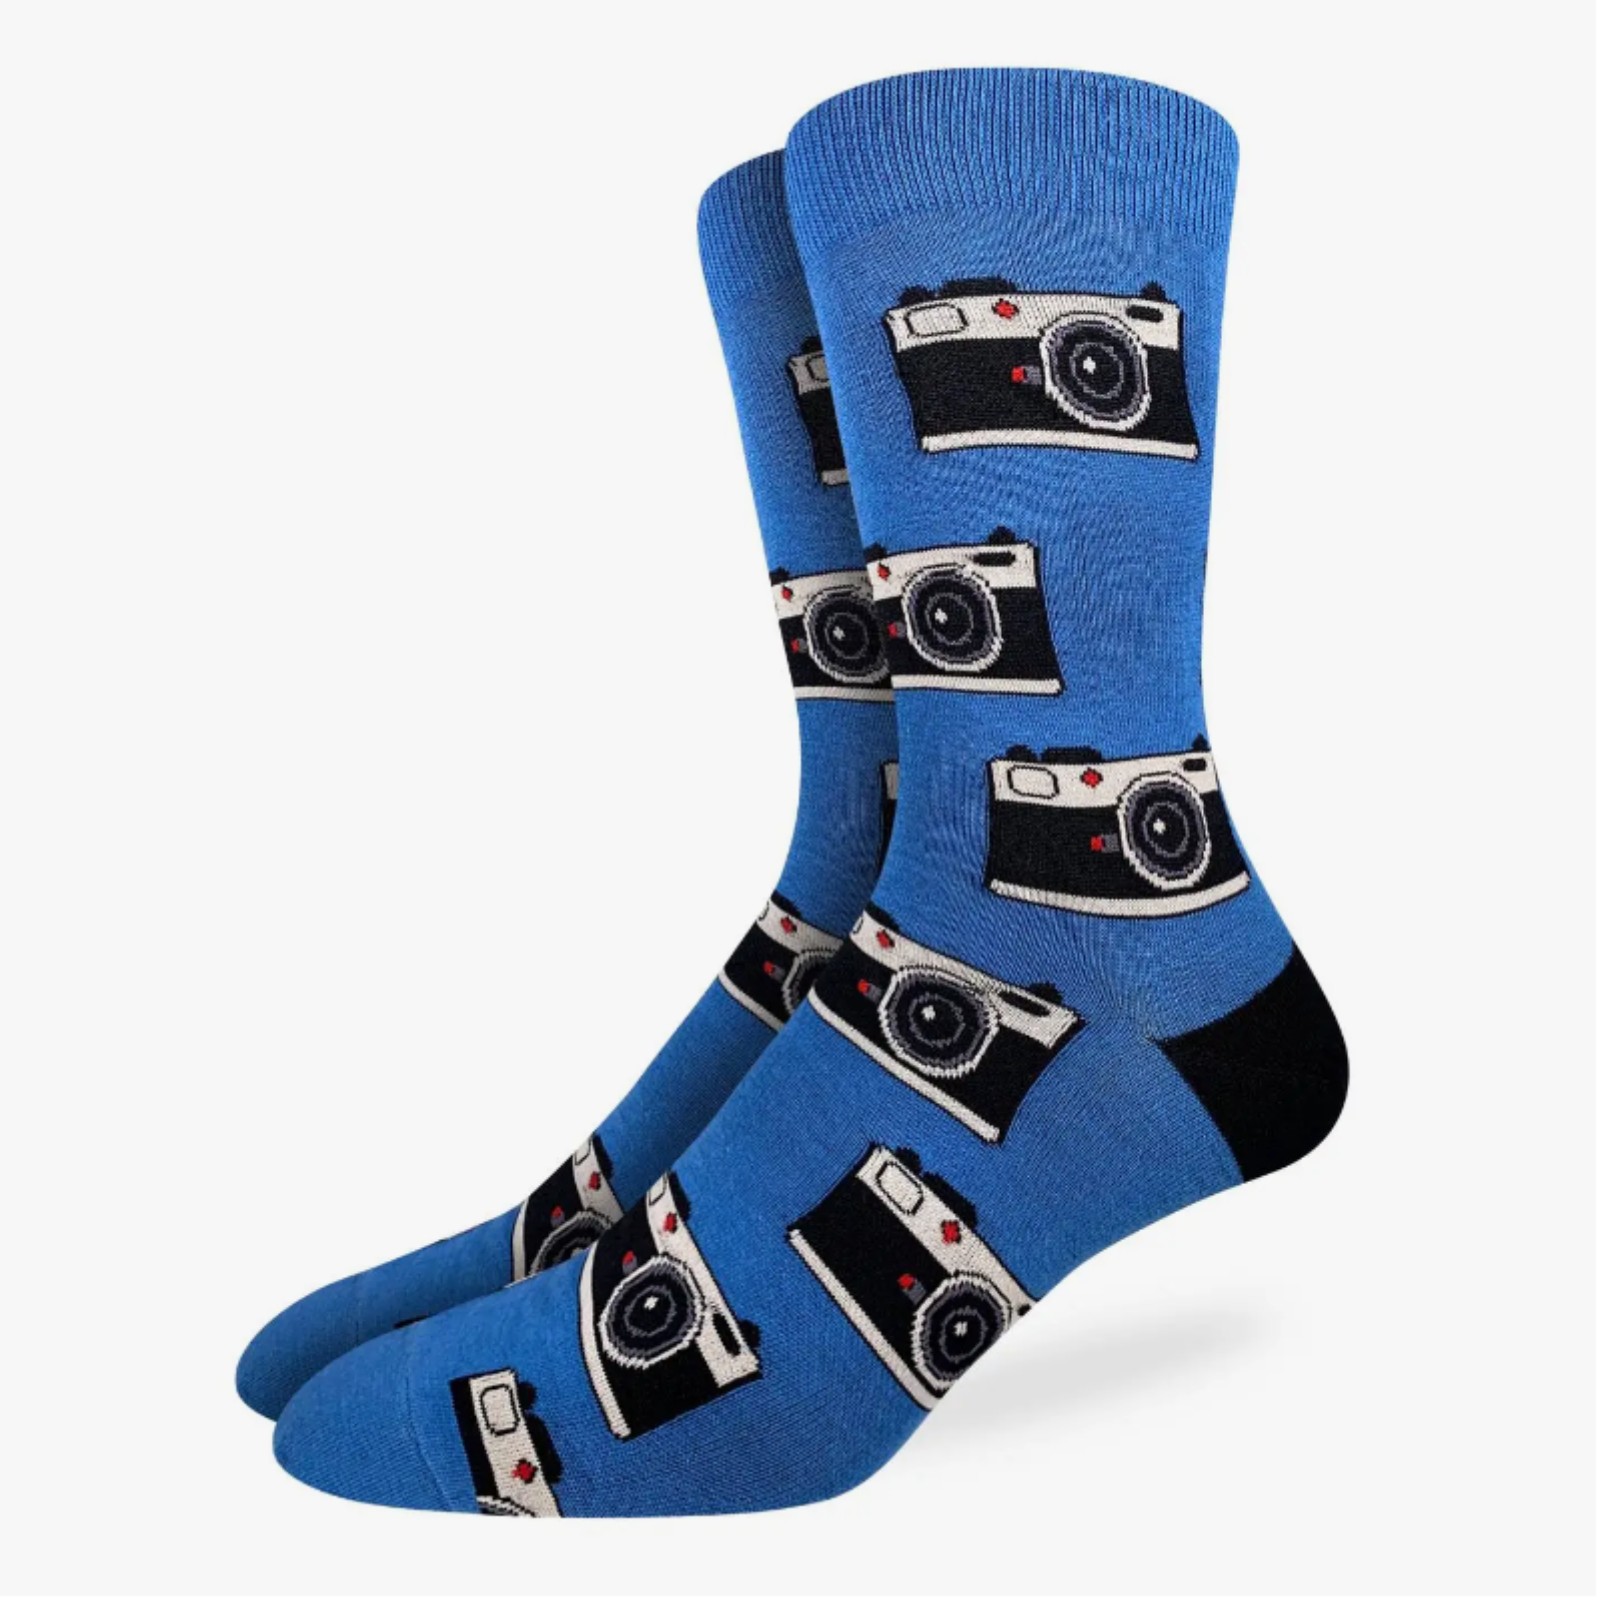 Good Luck Sock Camera men's sock featuring blue background with cameras all over